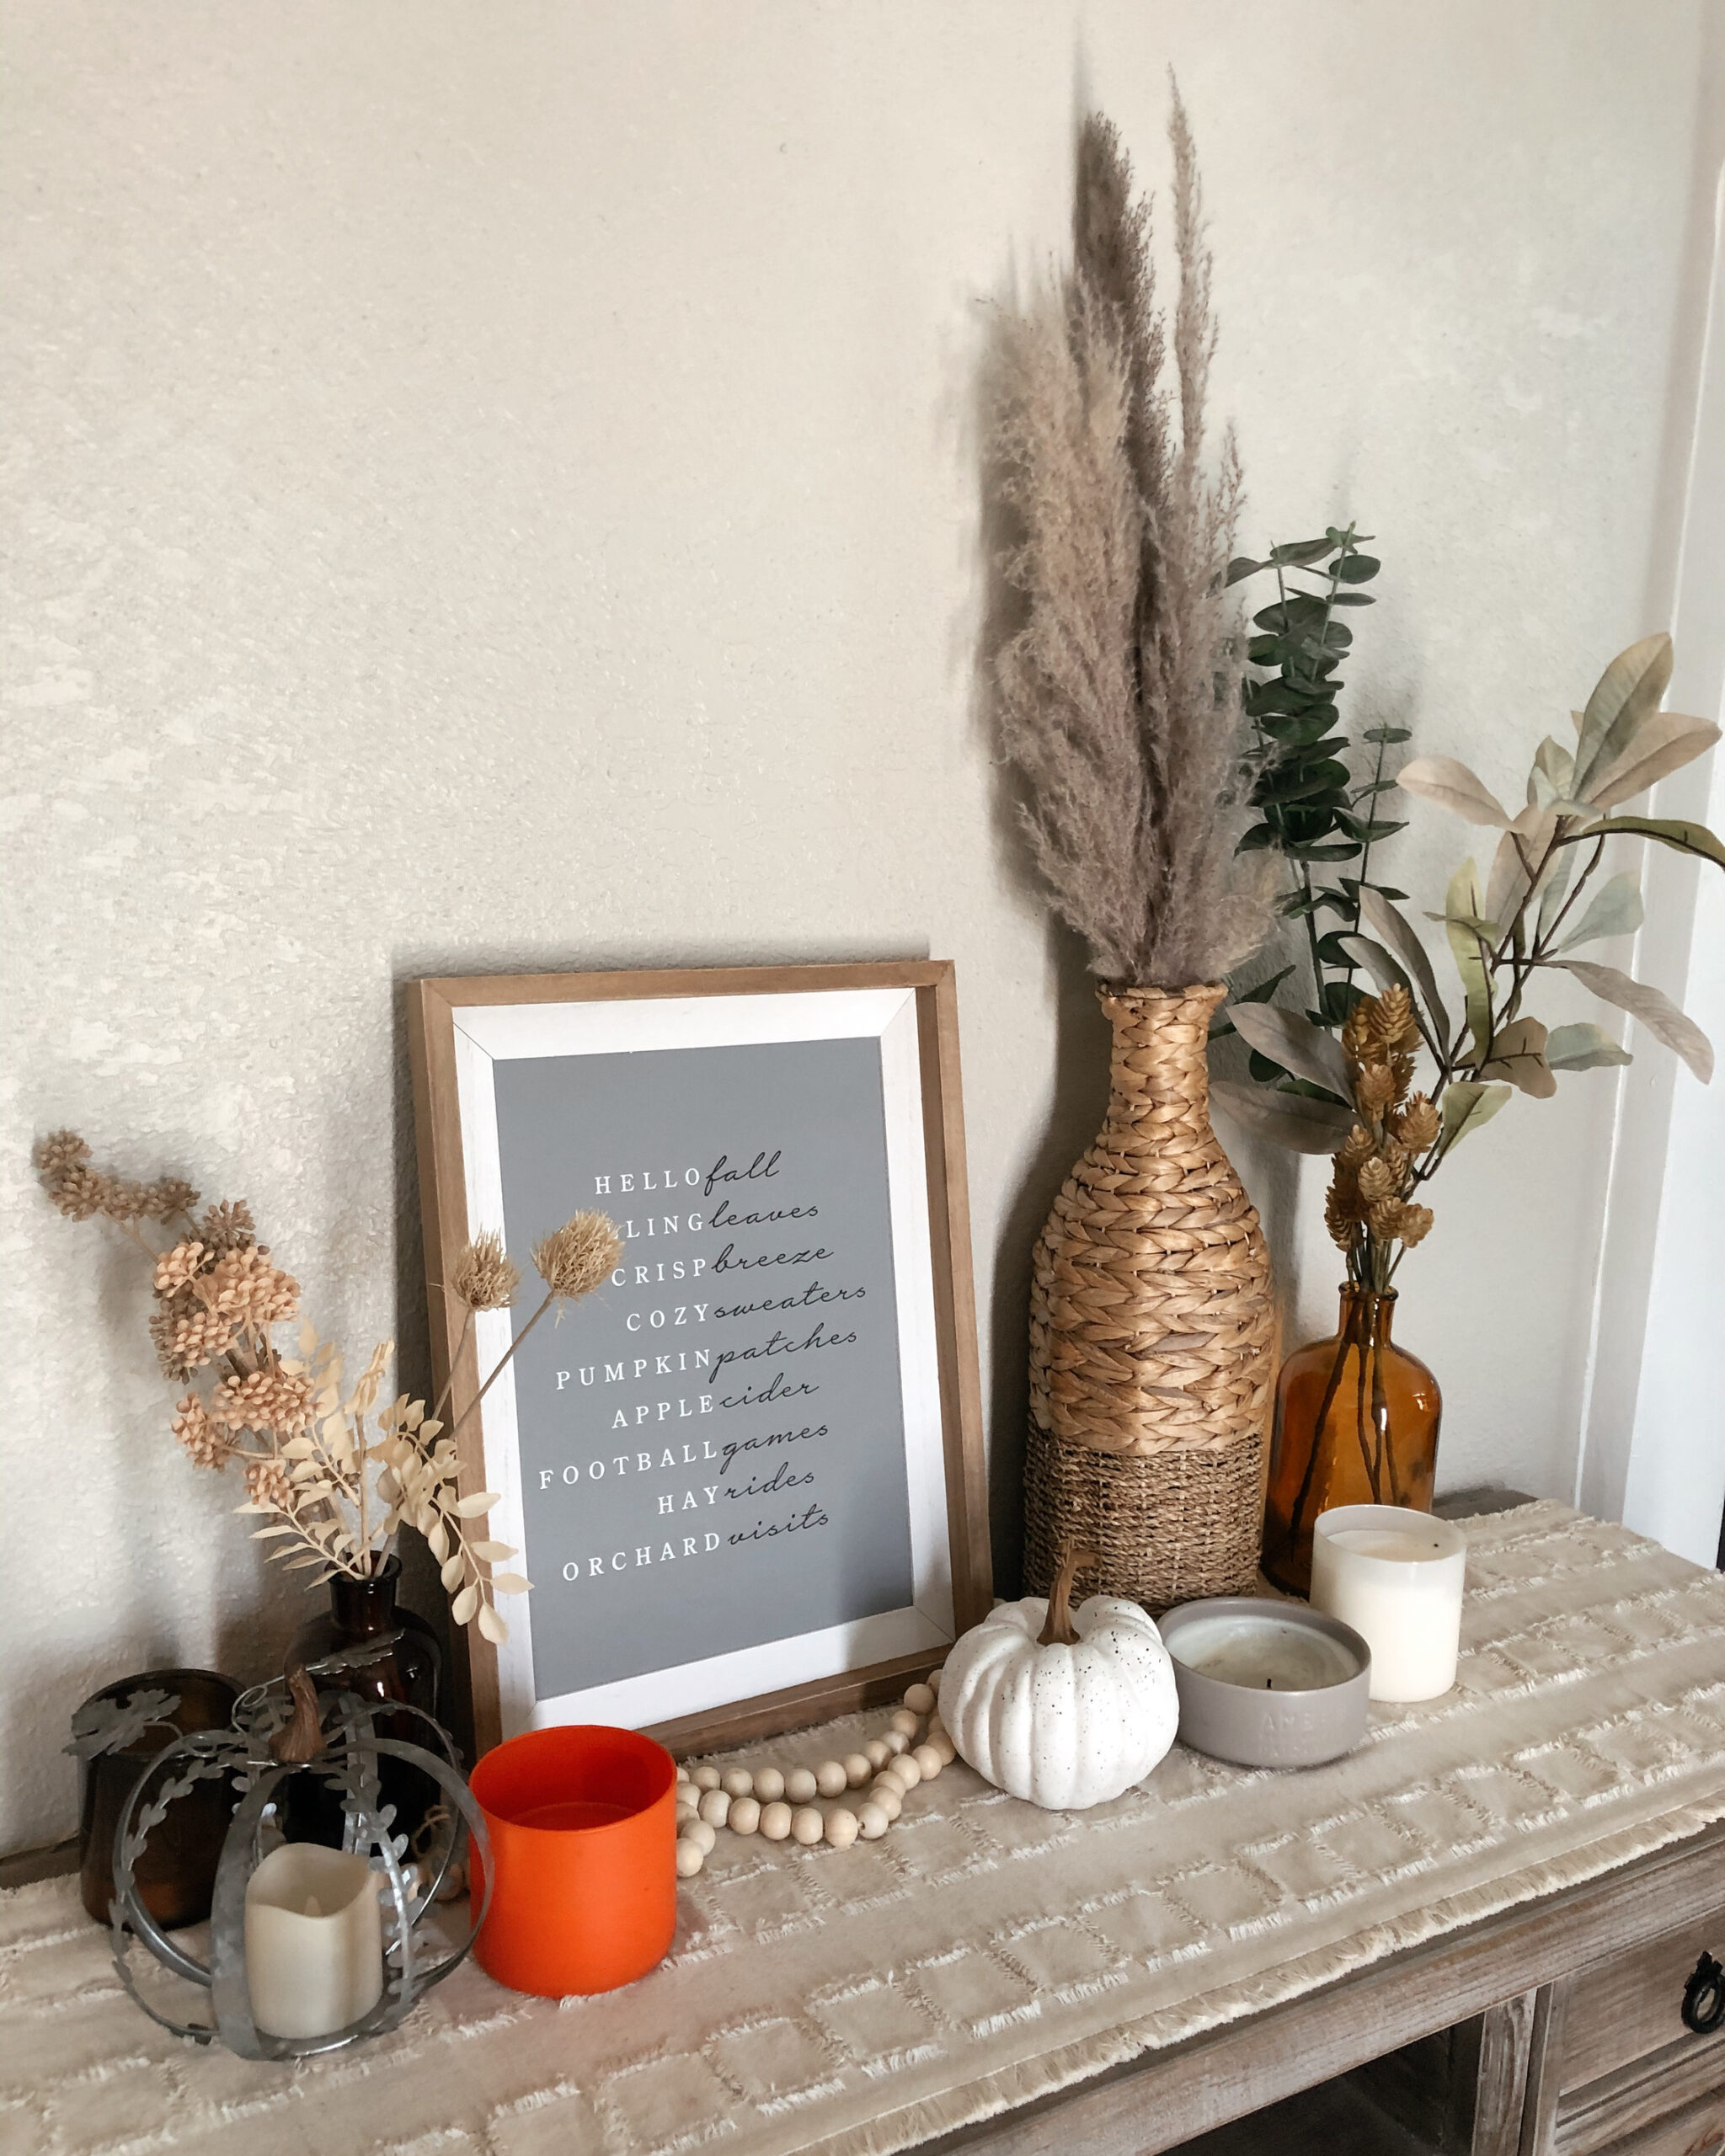 Target Home Decor - Fall 2020 Home Decor Finds | Affordable by Amanda